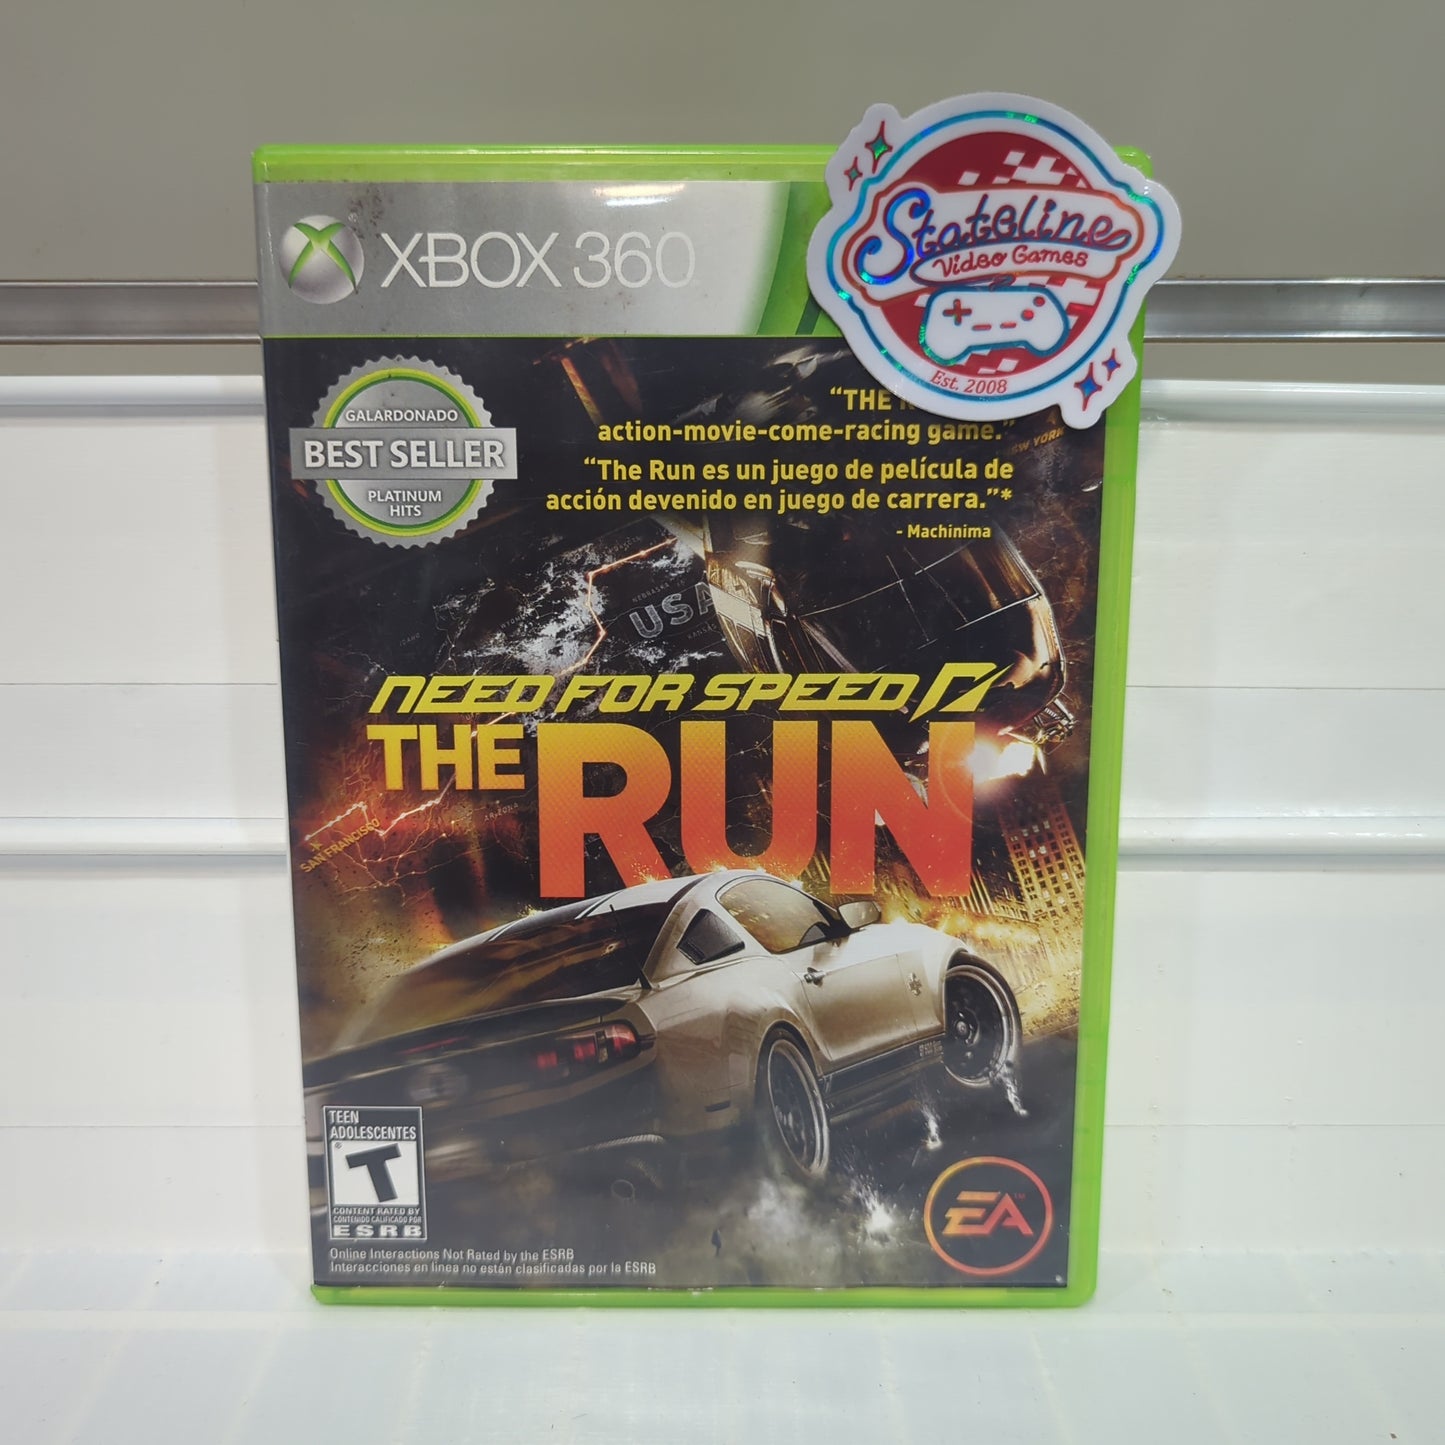 Need For Speed: The Run - Xbox 360